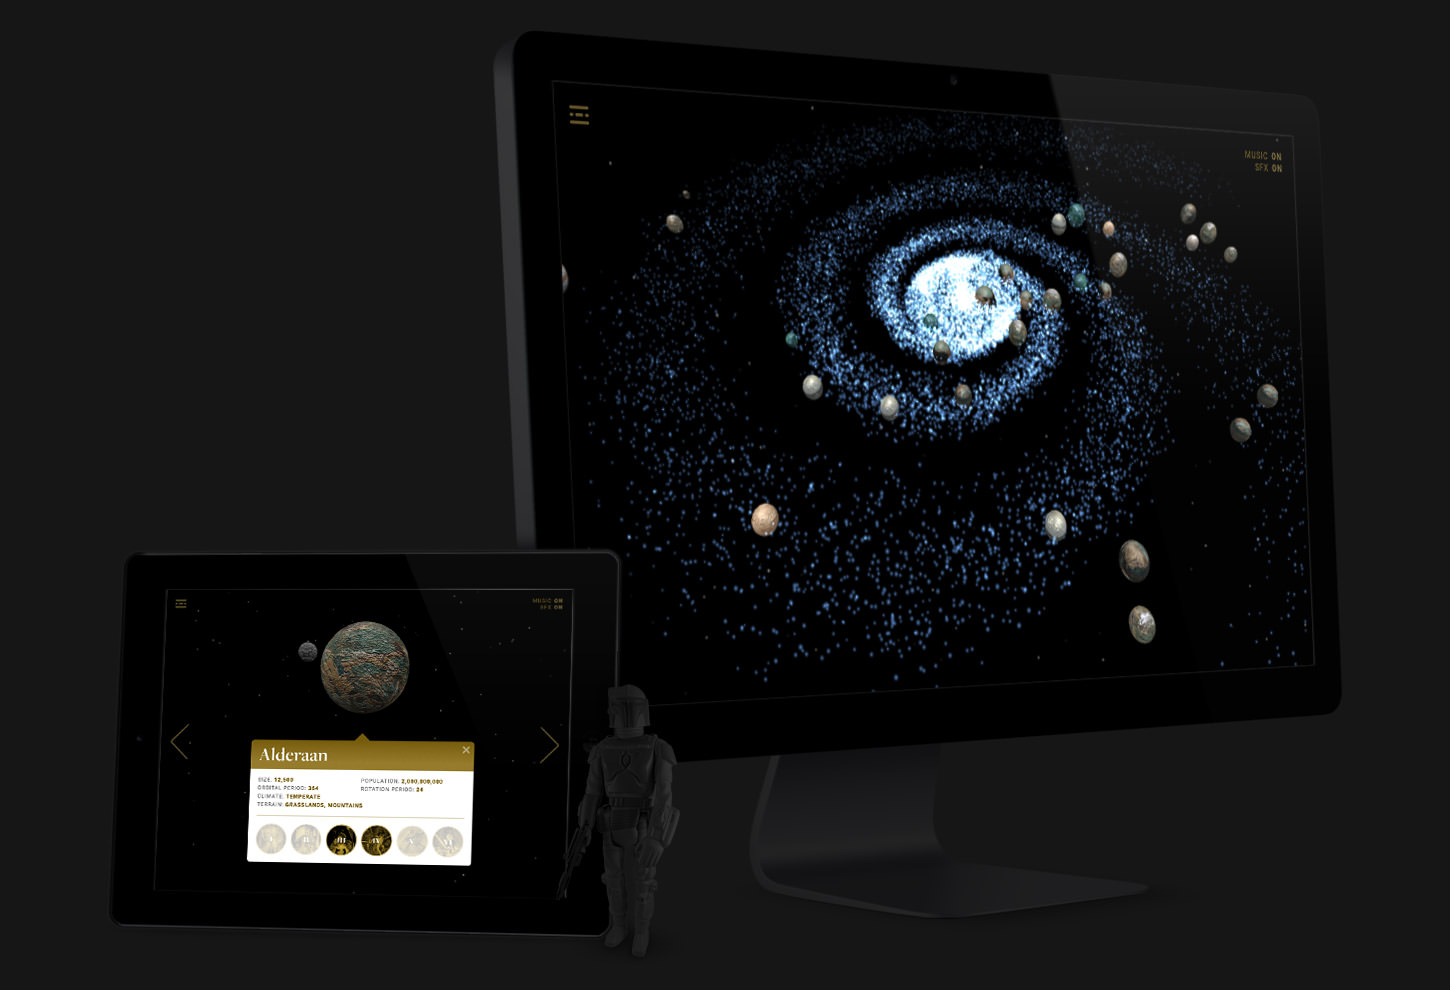 The Star Wars Galaxy site displayed on a tablet and computer